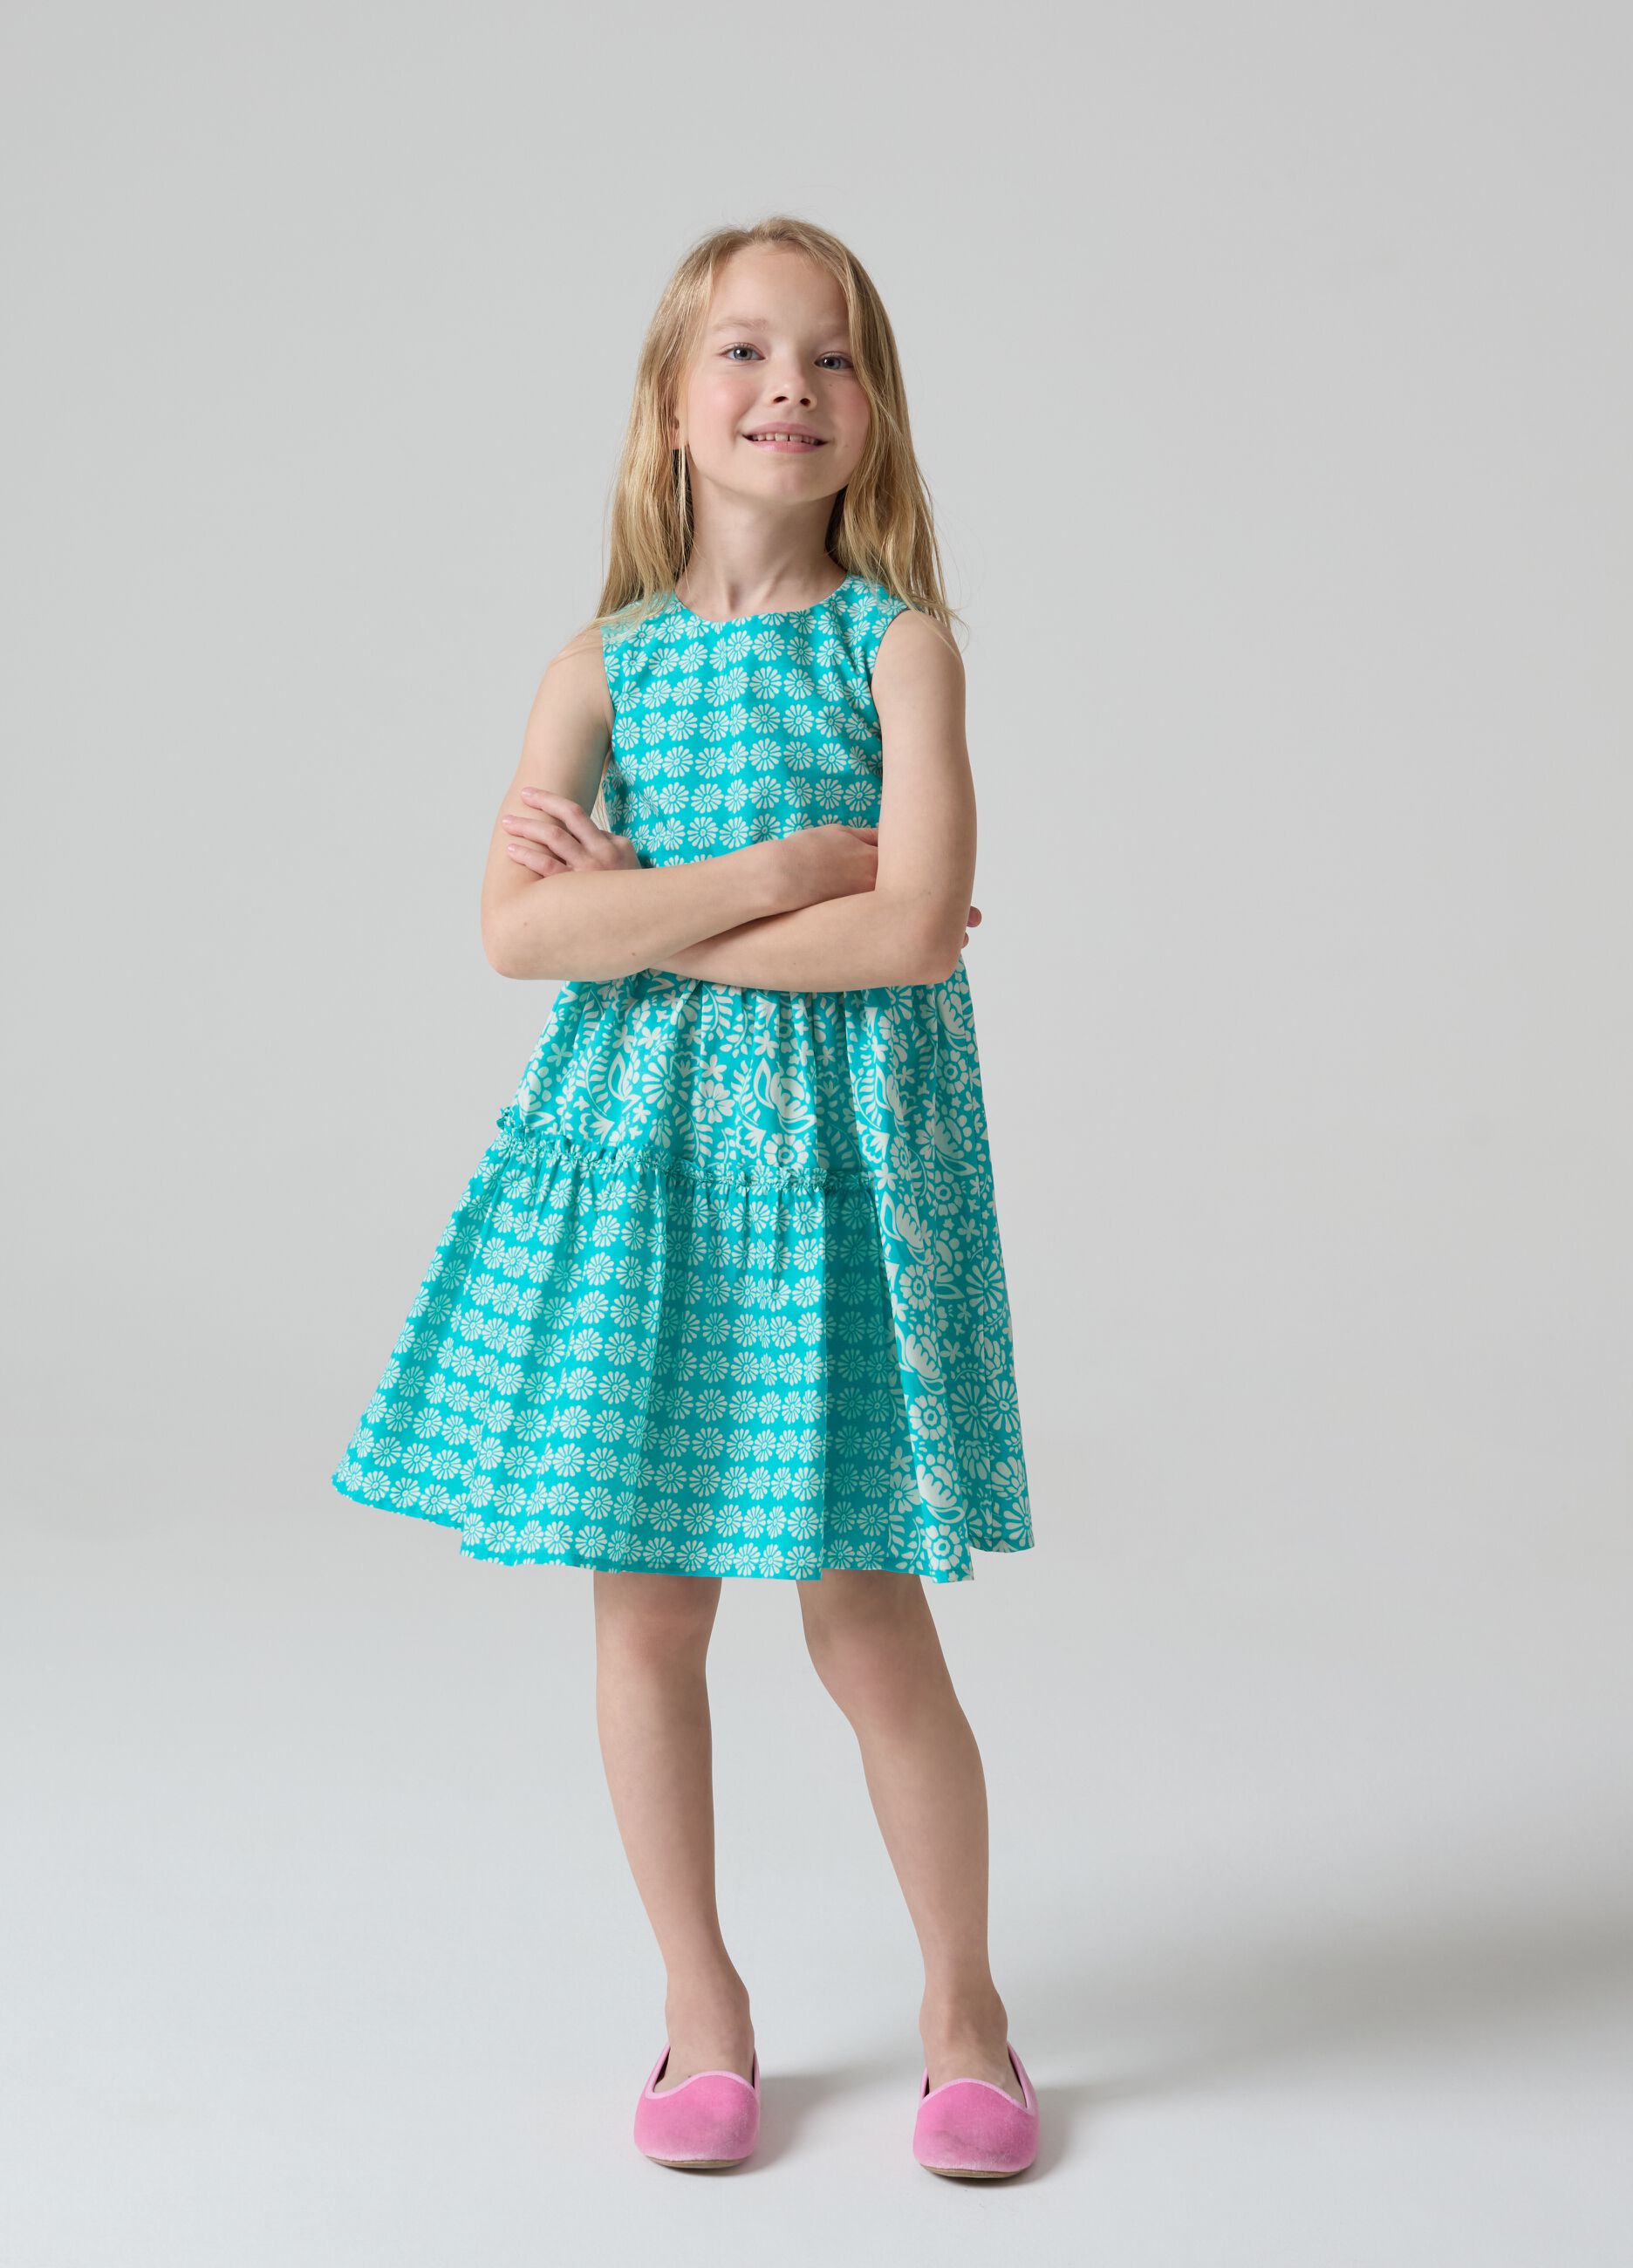 Tiered dress with floral pattern